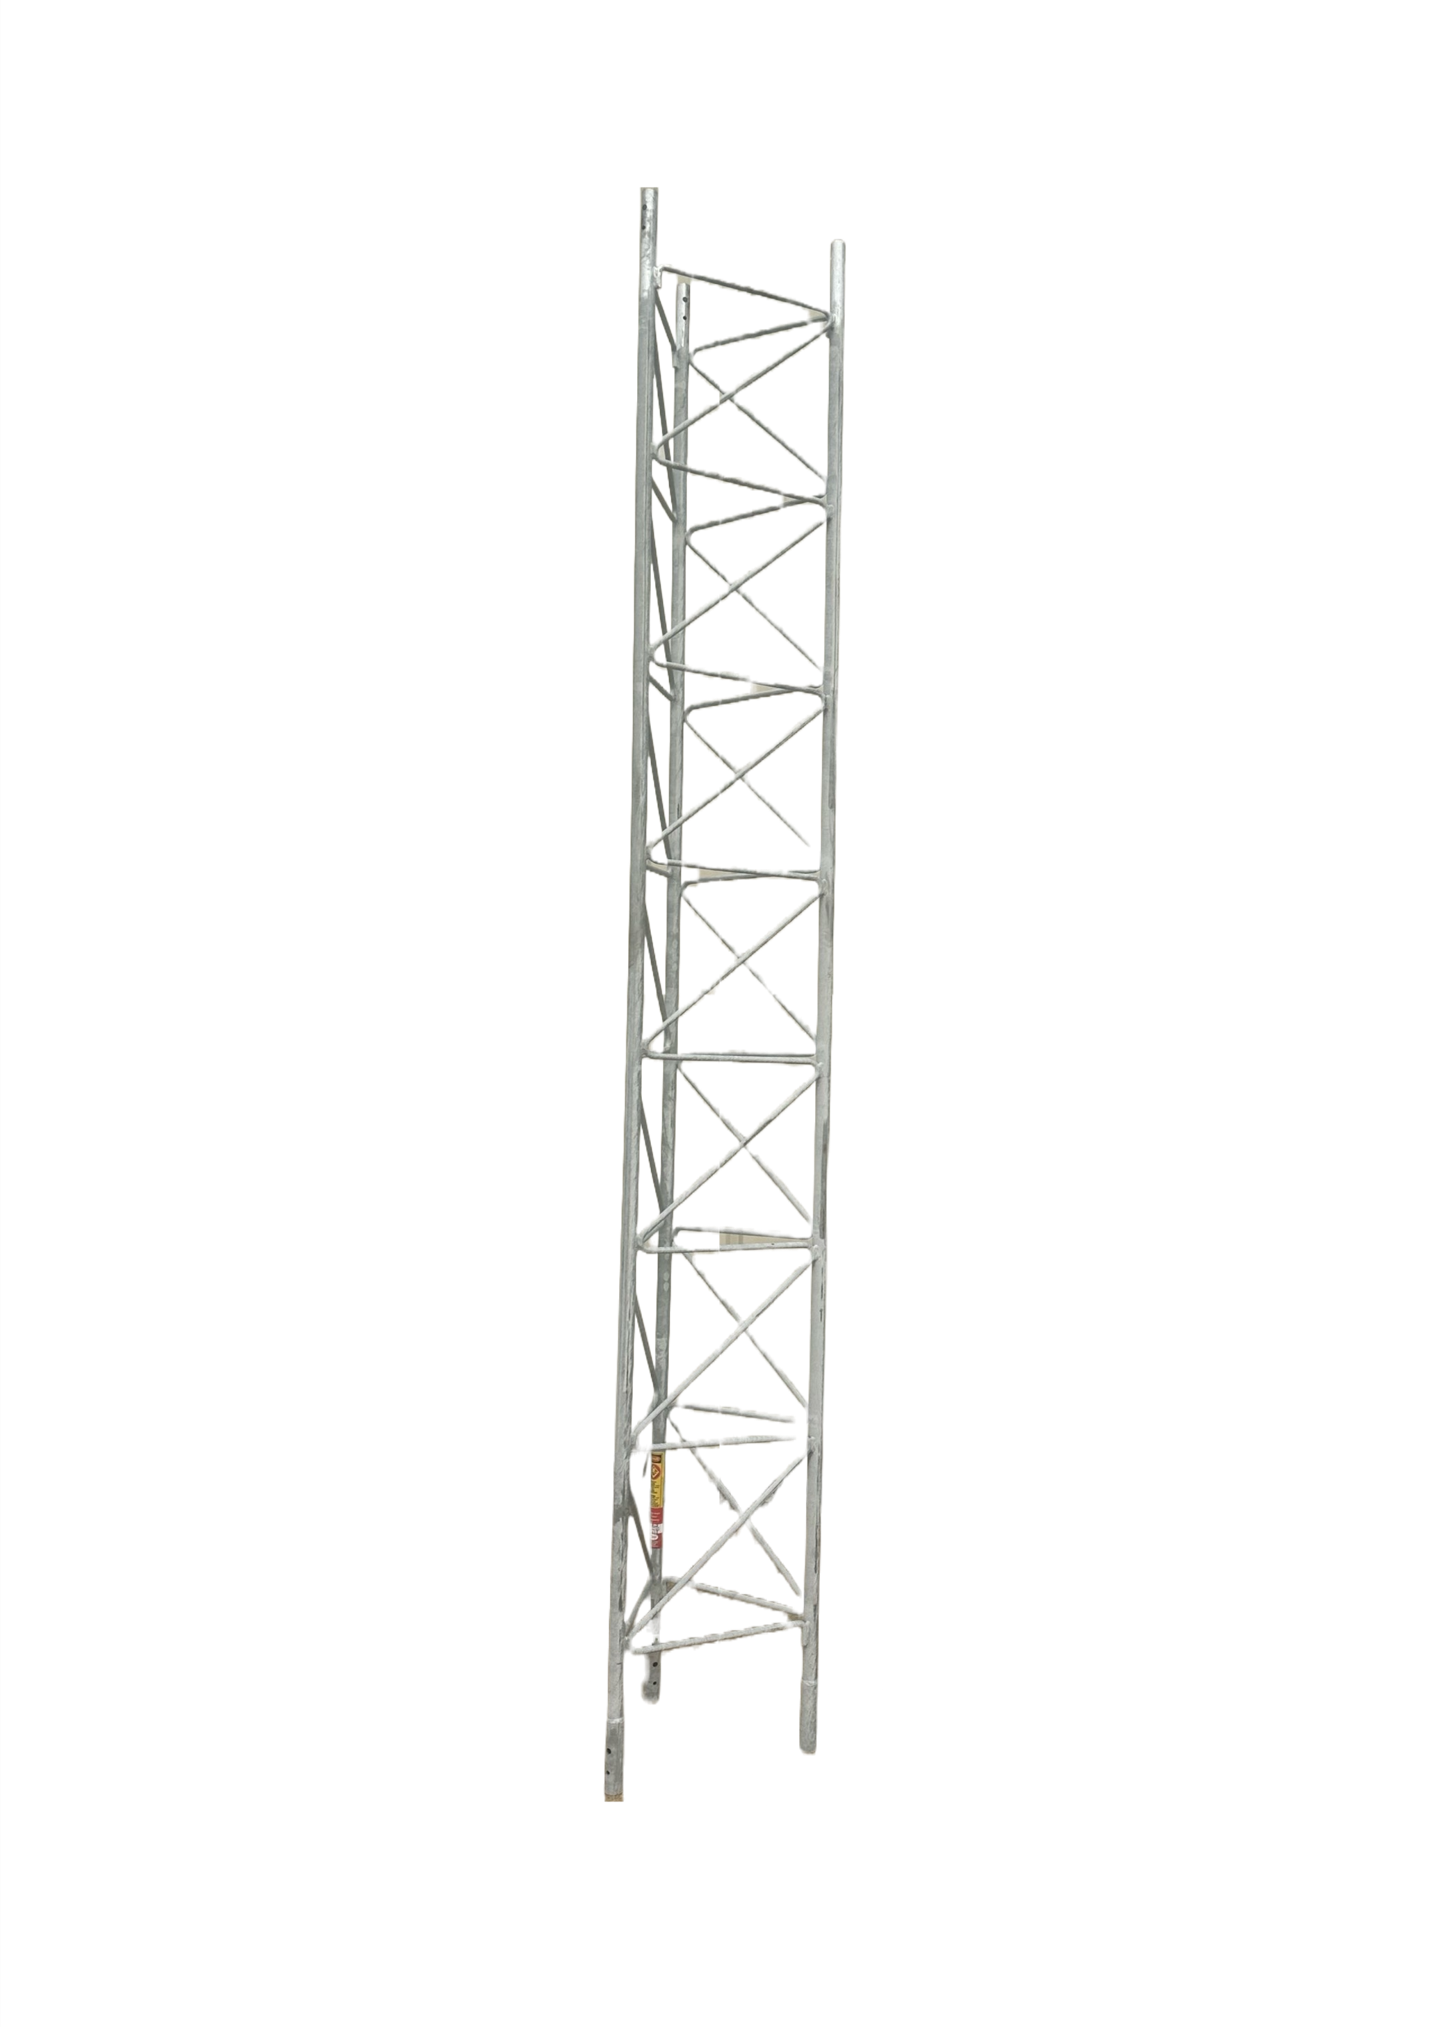 Amerite 45 Series 10 foot Tower Mid Section